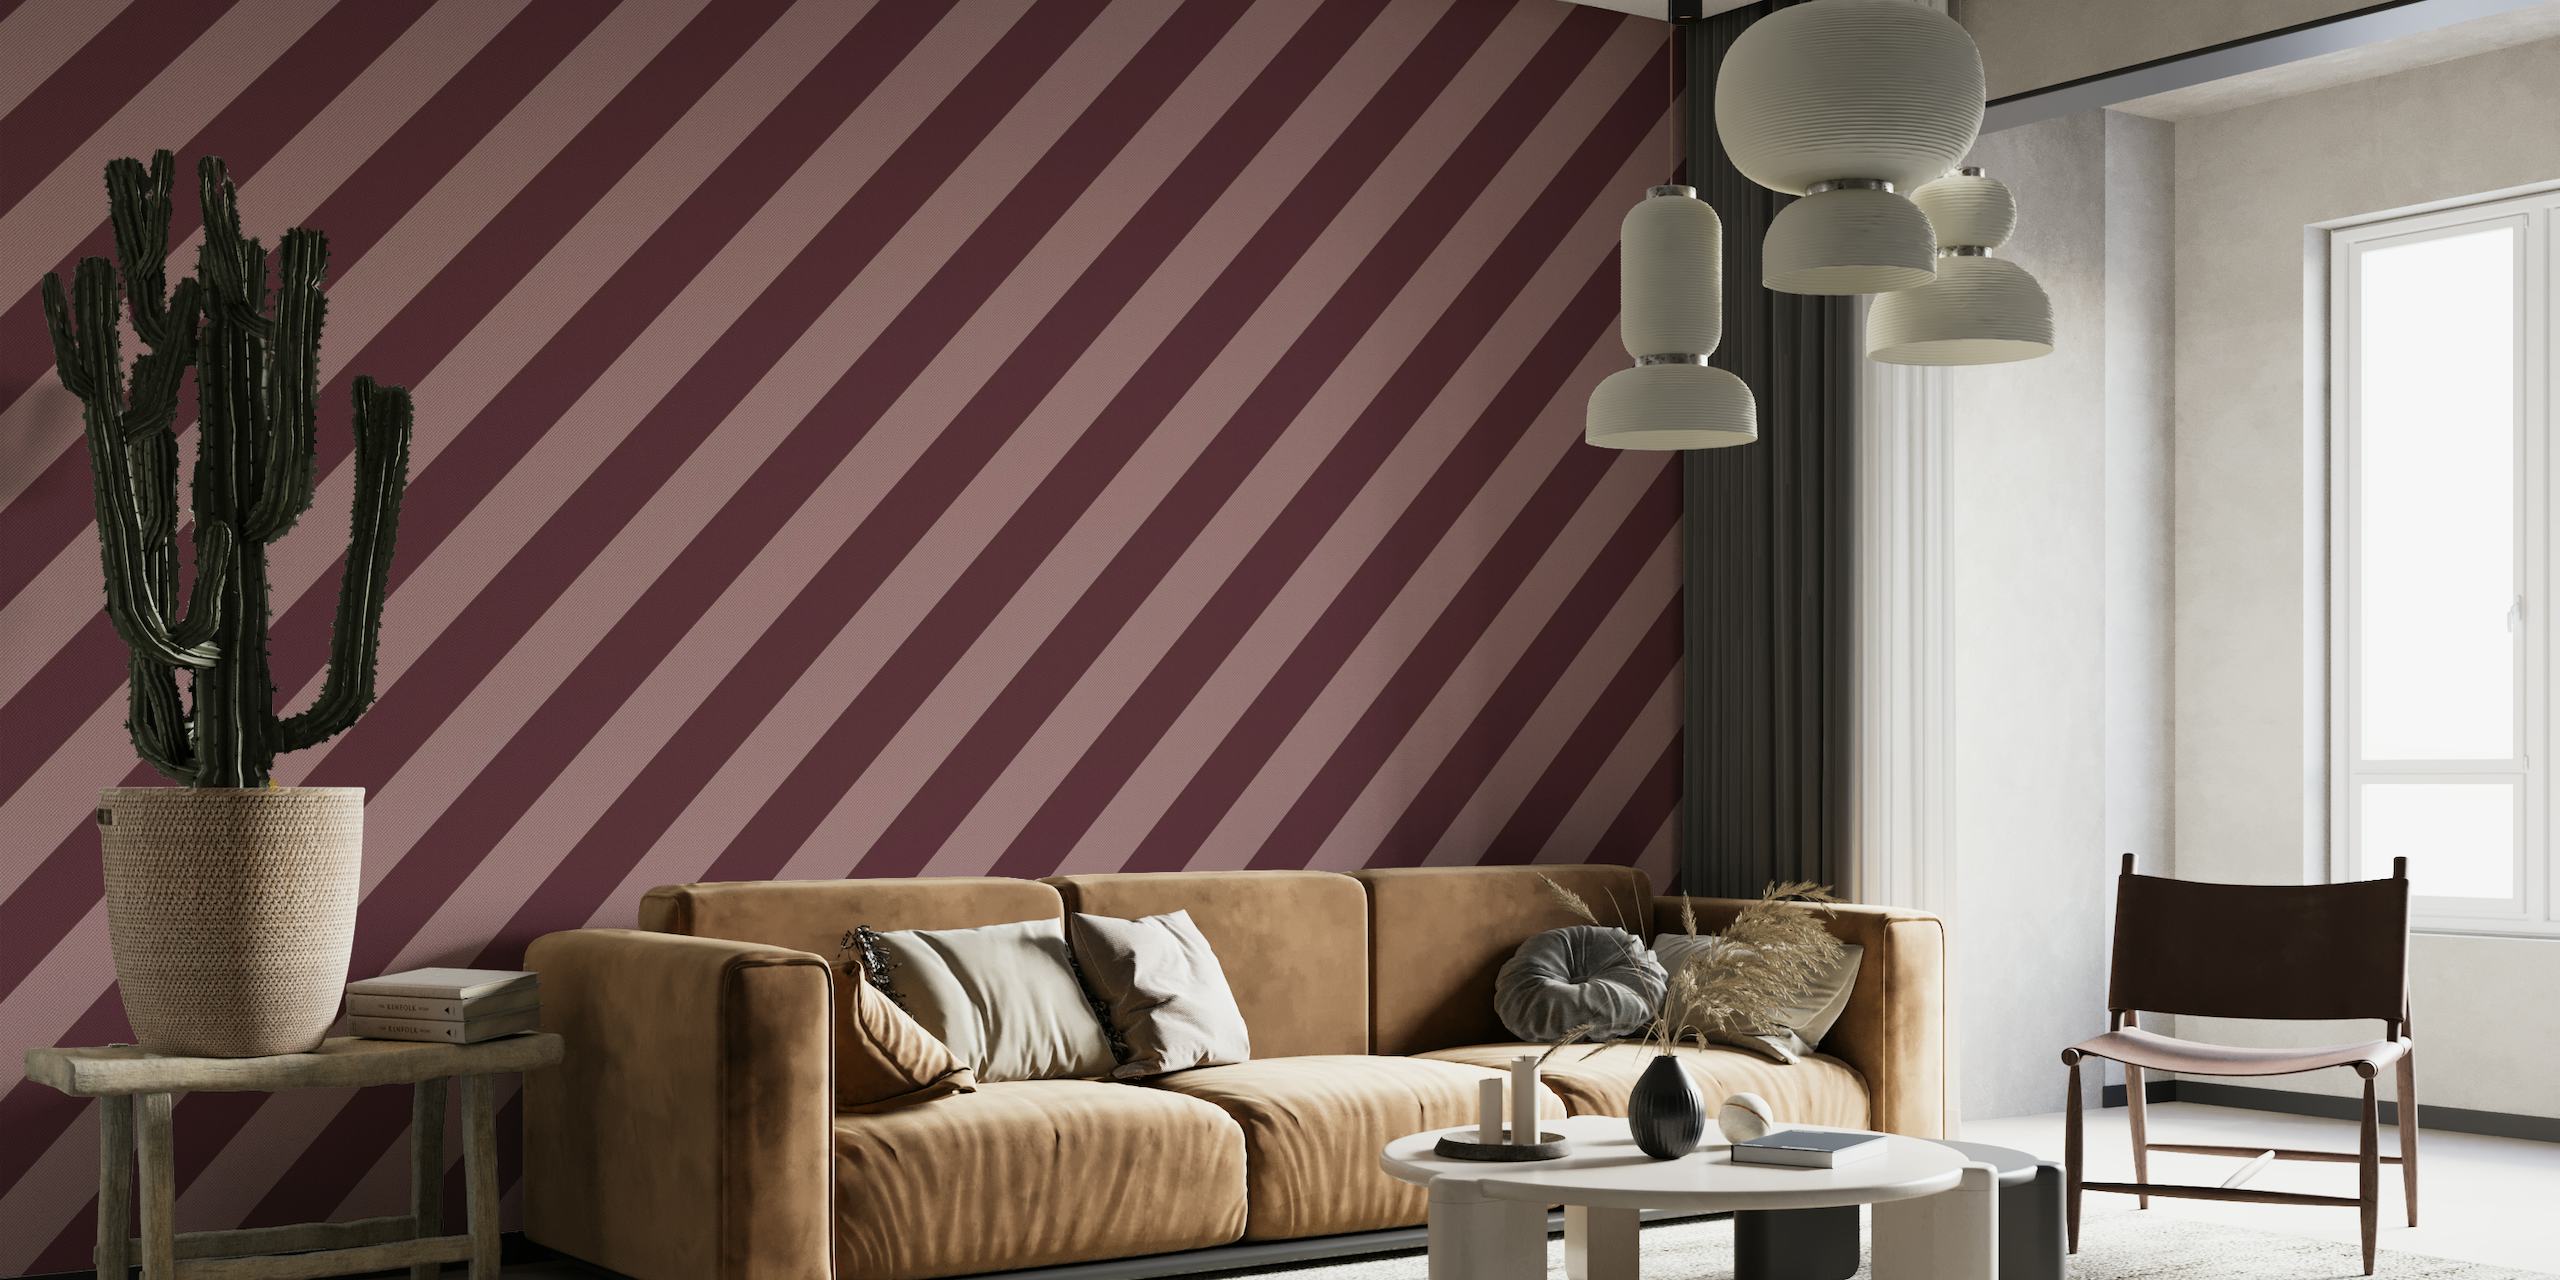 Textured diagonal stripe pattern in bordeaux and rosewood colors for a wall mural